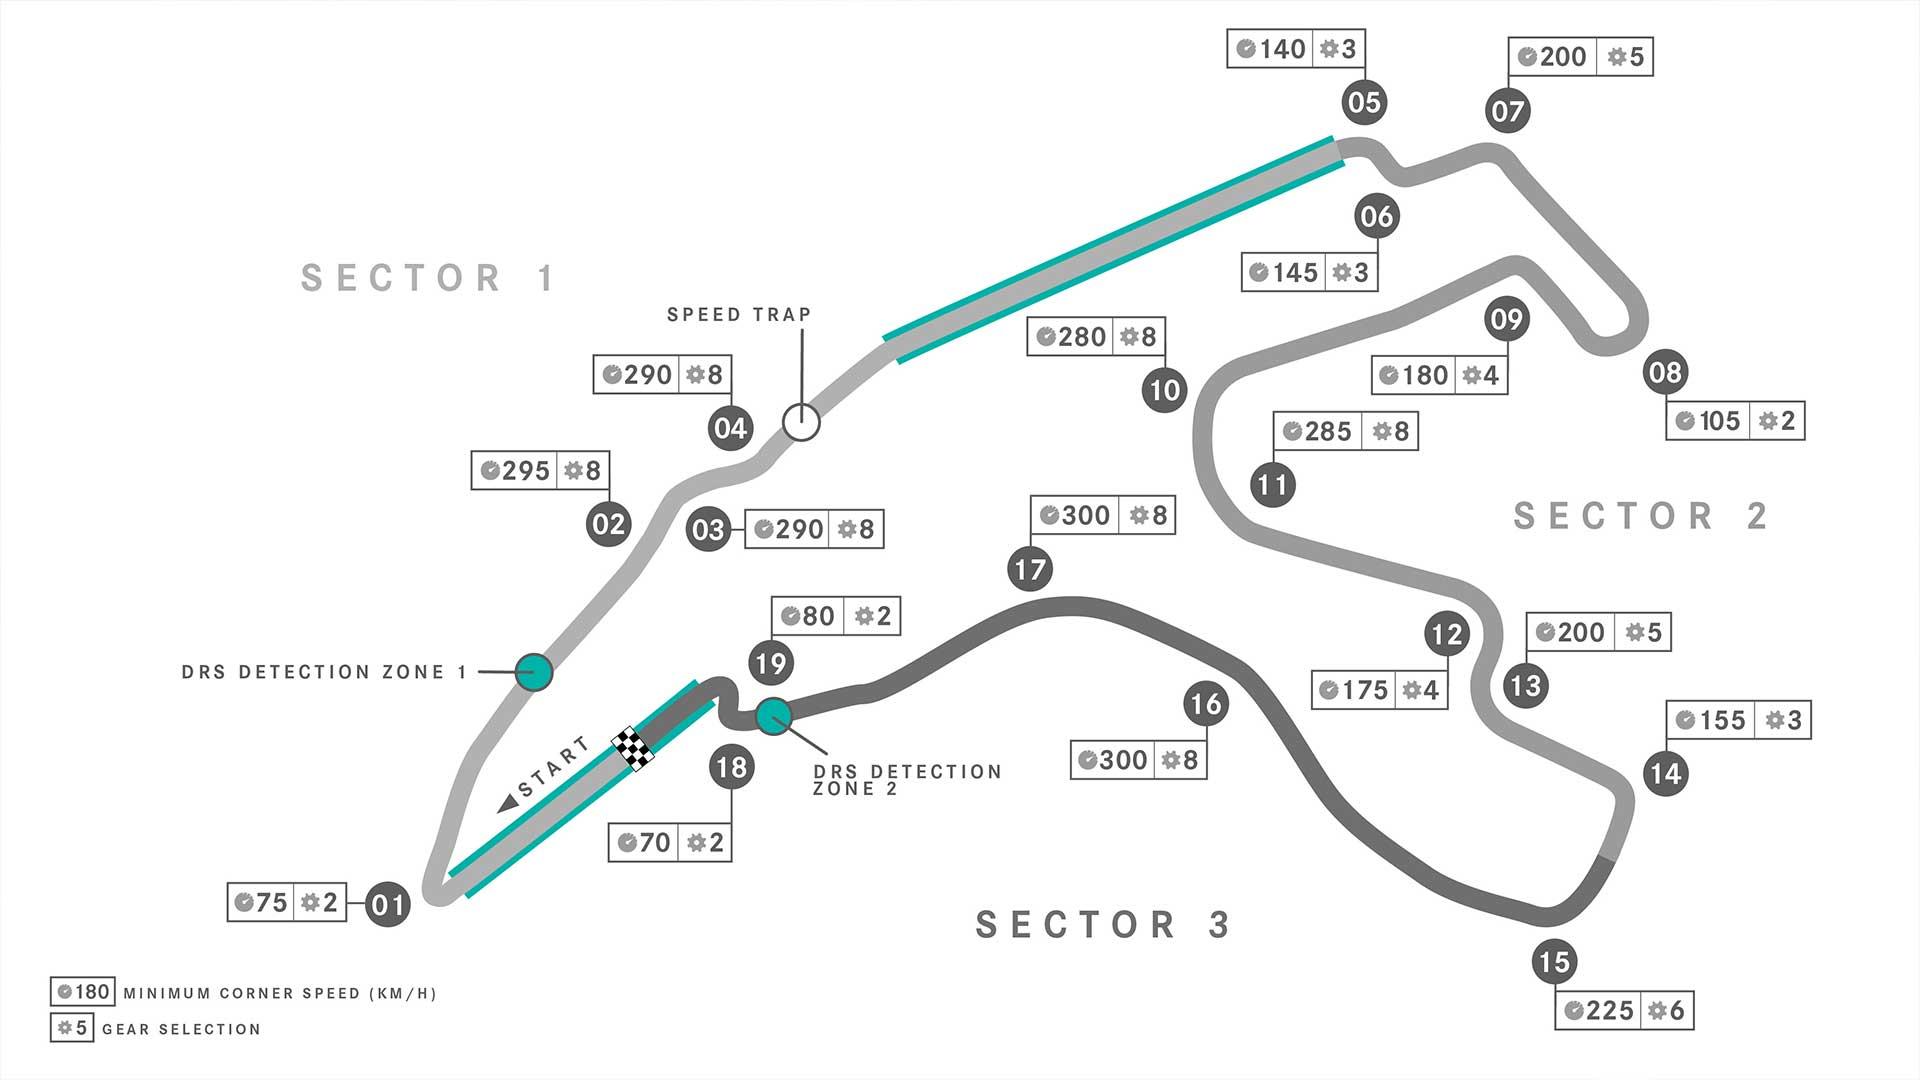 Spa-Francorchamps lay-out